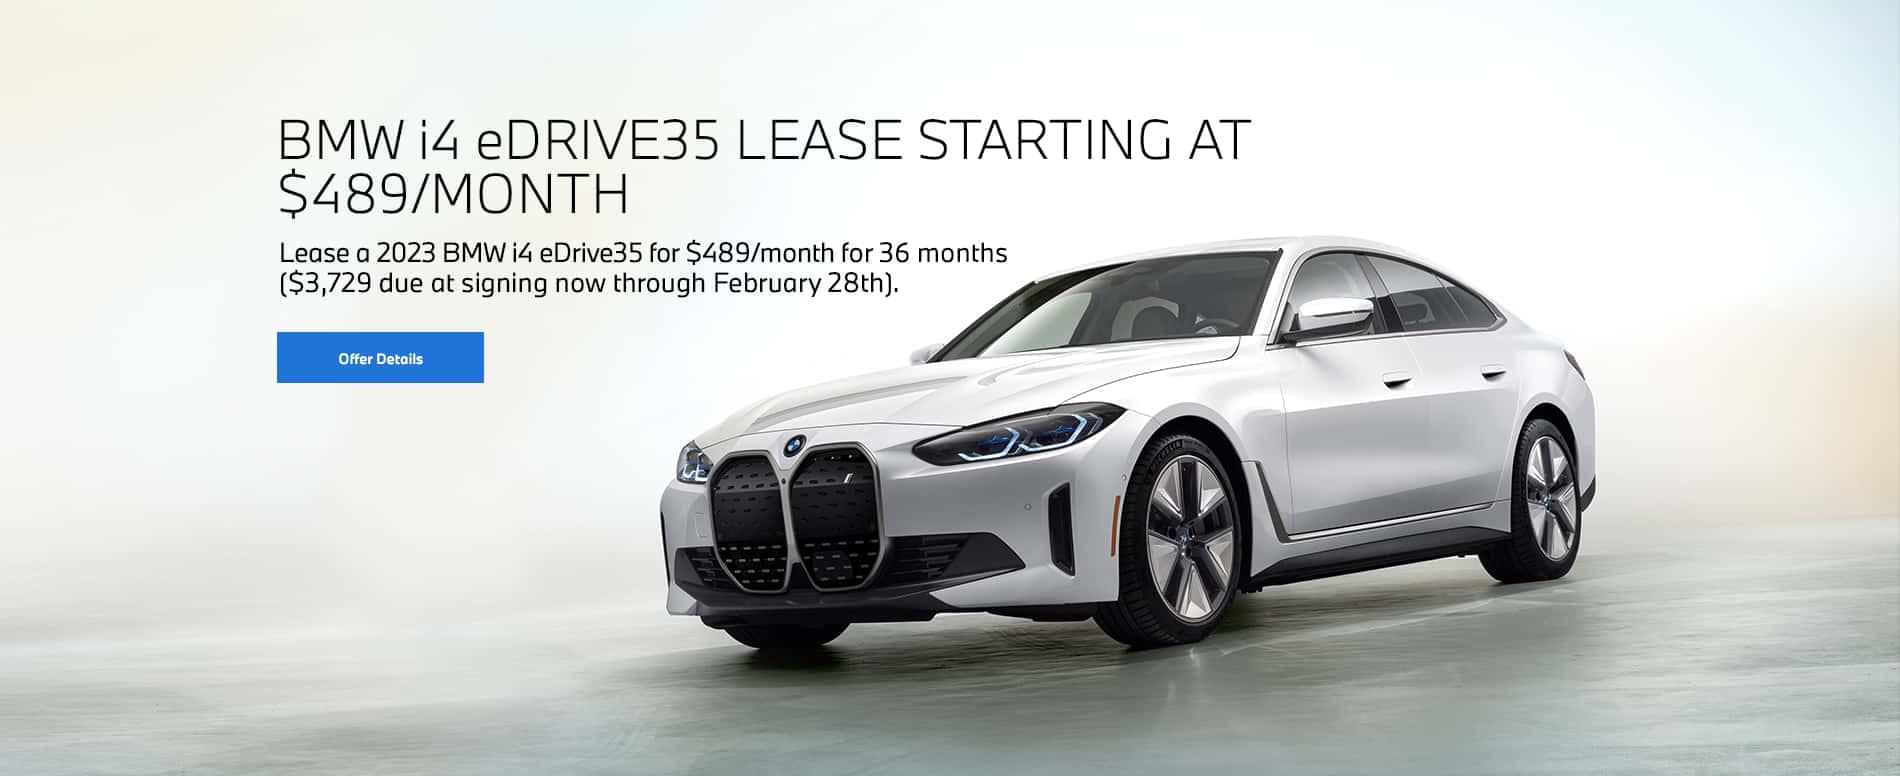 2023 i4 lease starting at $489 per month for 36 months